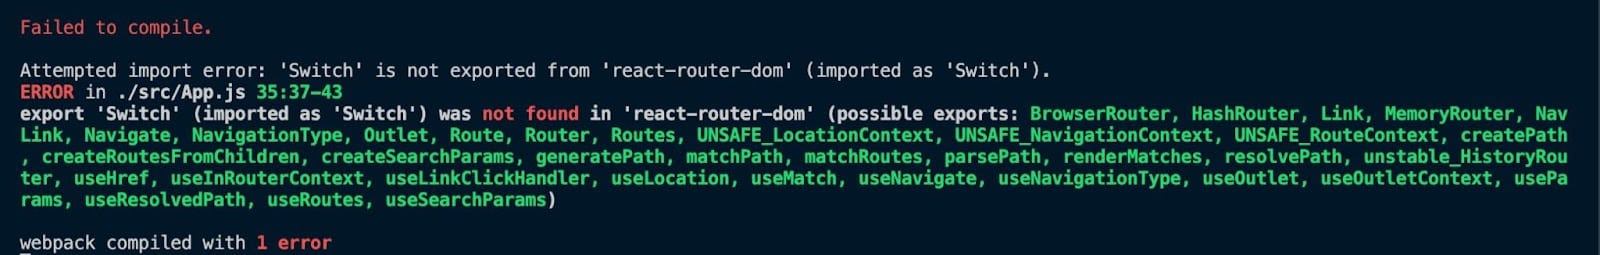 How To Fix “Switch Is Not Exported From 'React-Router-Dom' In React” Error  - Kinsta®